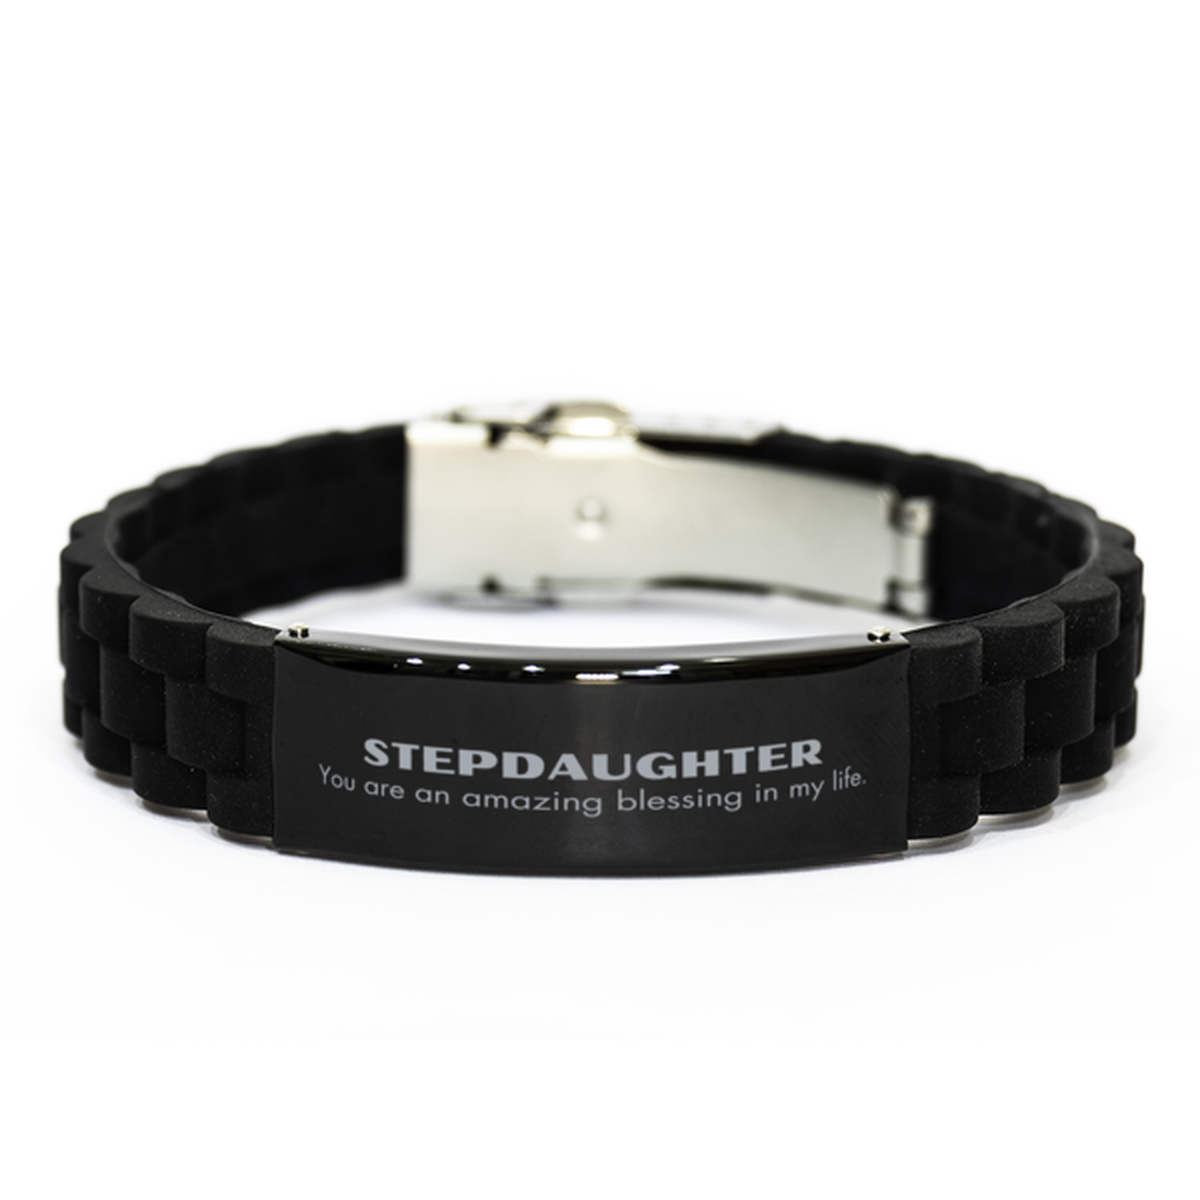 Stepdaughter Black Glidelock Clasp Bracelet, You are an amazing blessing in my life, Thank You Gifts For Stepdaughter, Inspirational Birthday Christmas Unique Gifts For Stepdaughter